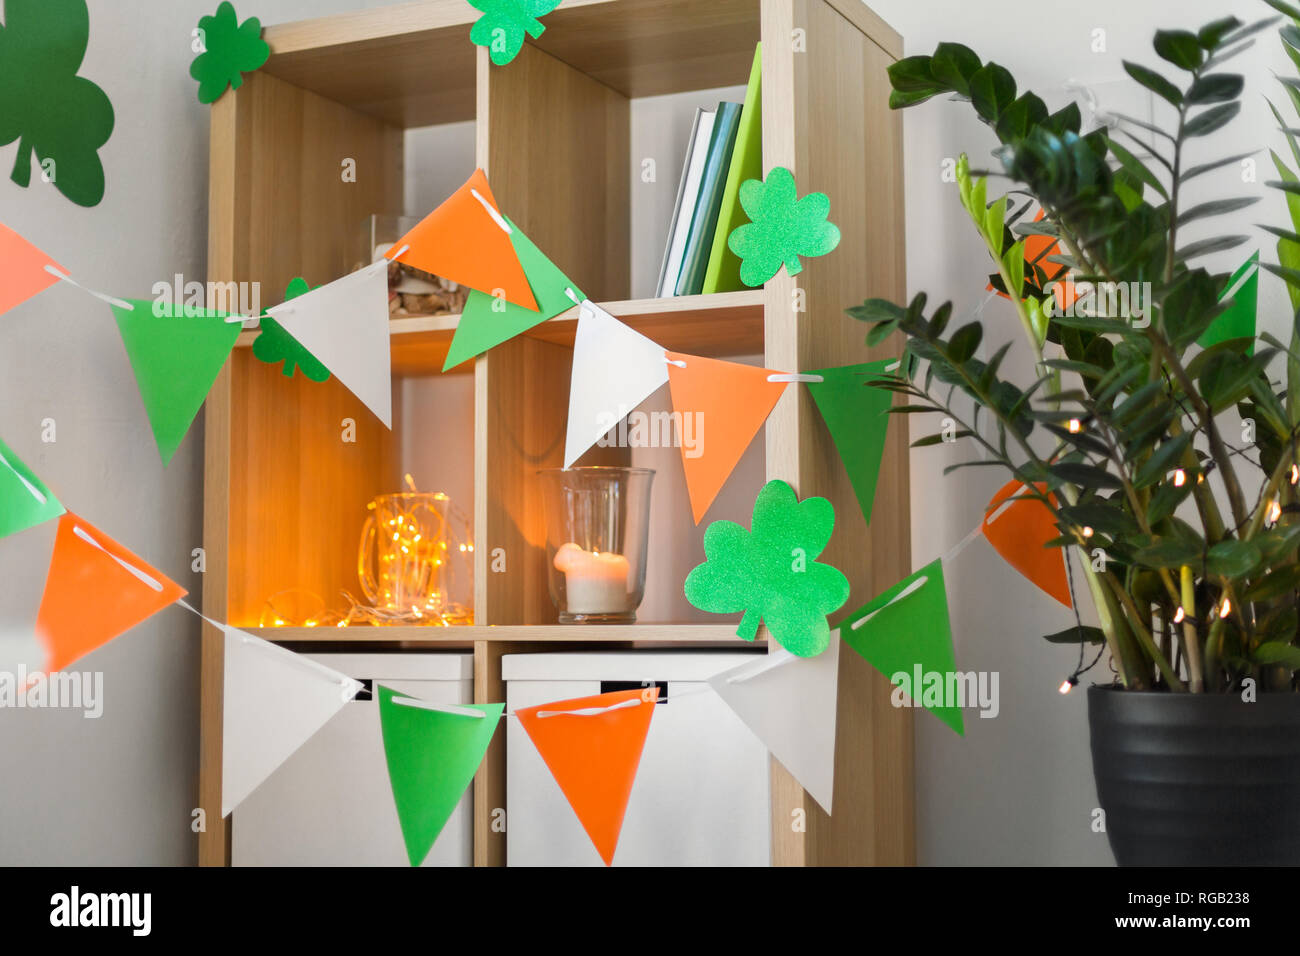 home interior decorated for st patricks day party Stock Photo